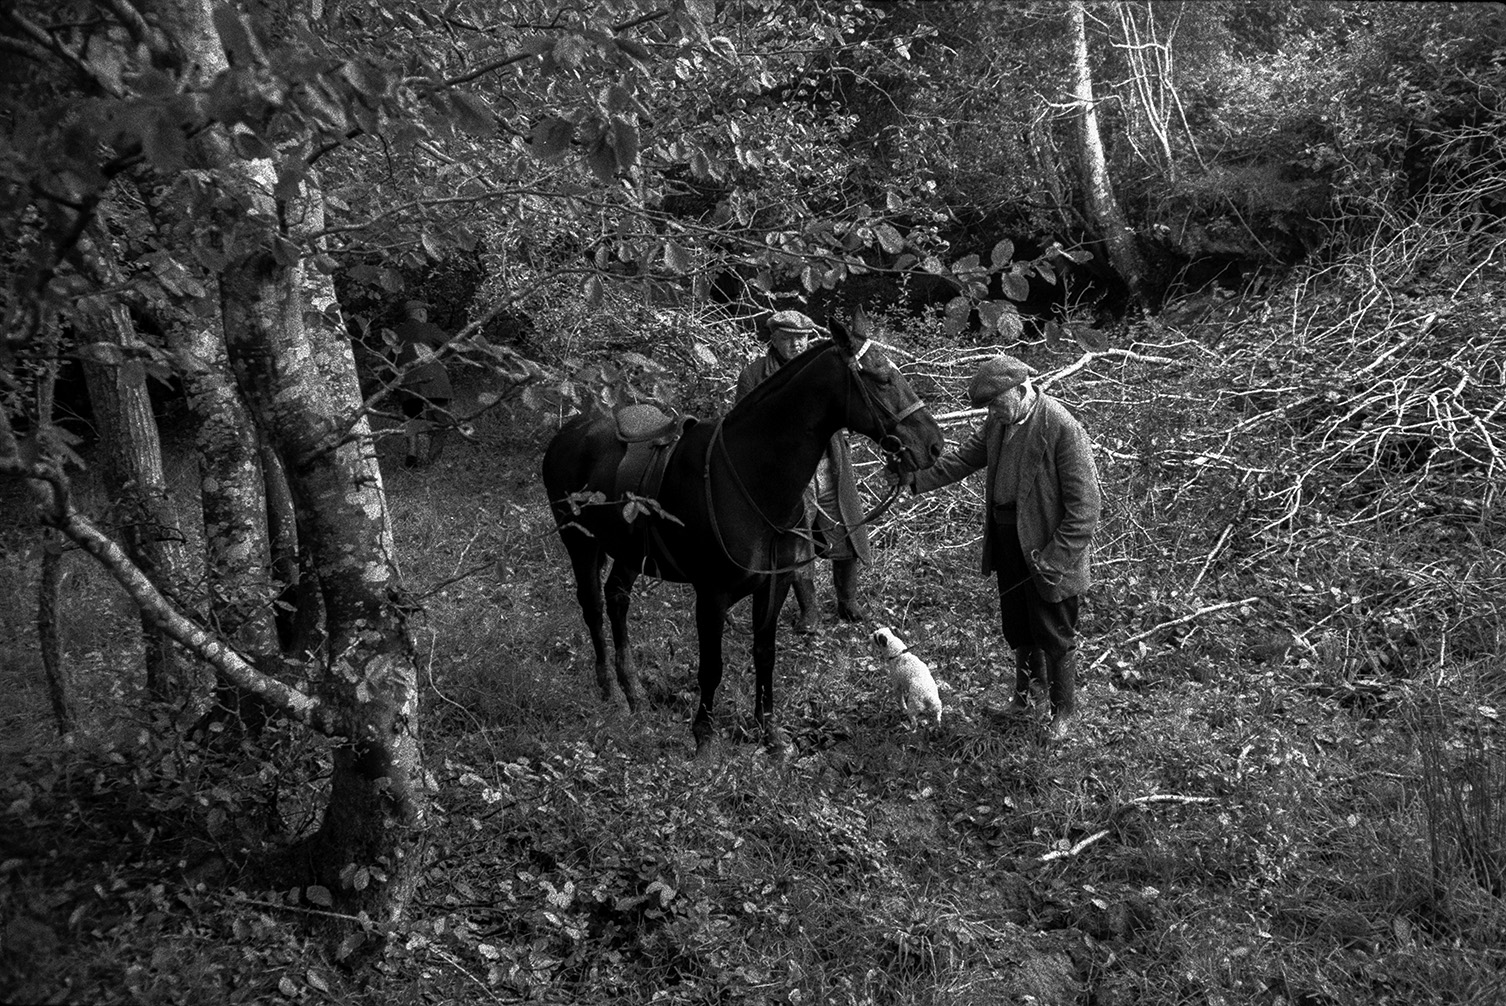 Two men with Mr Grill's horse and a dog at the edge of a wood at Cranford Cross, Torrington, possibly at a hunt. Another man can be seen through the trees in the background.